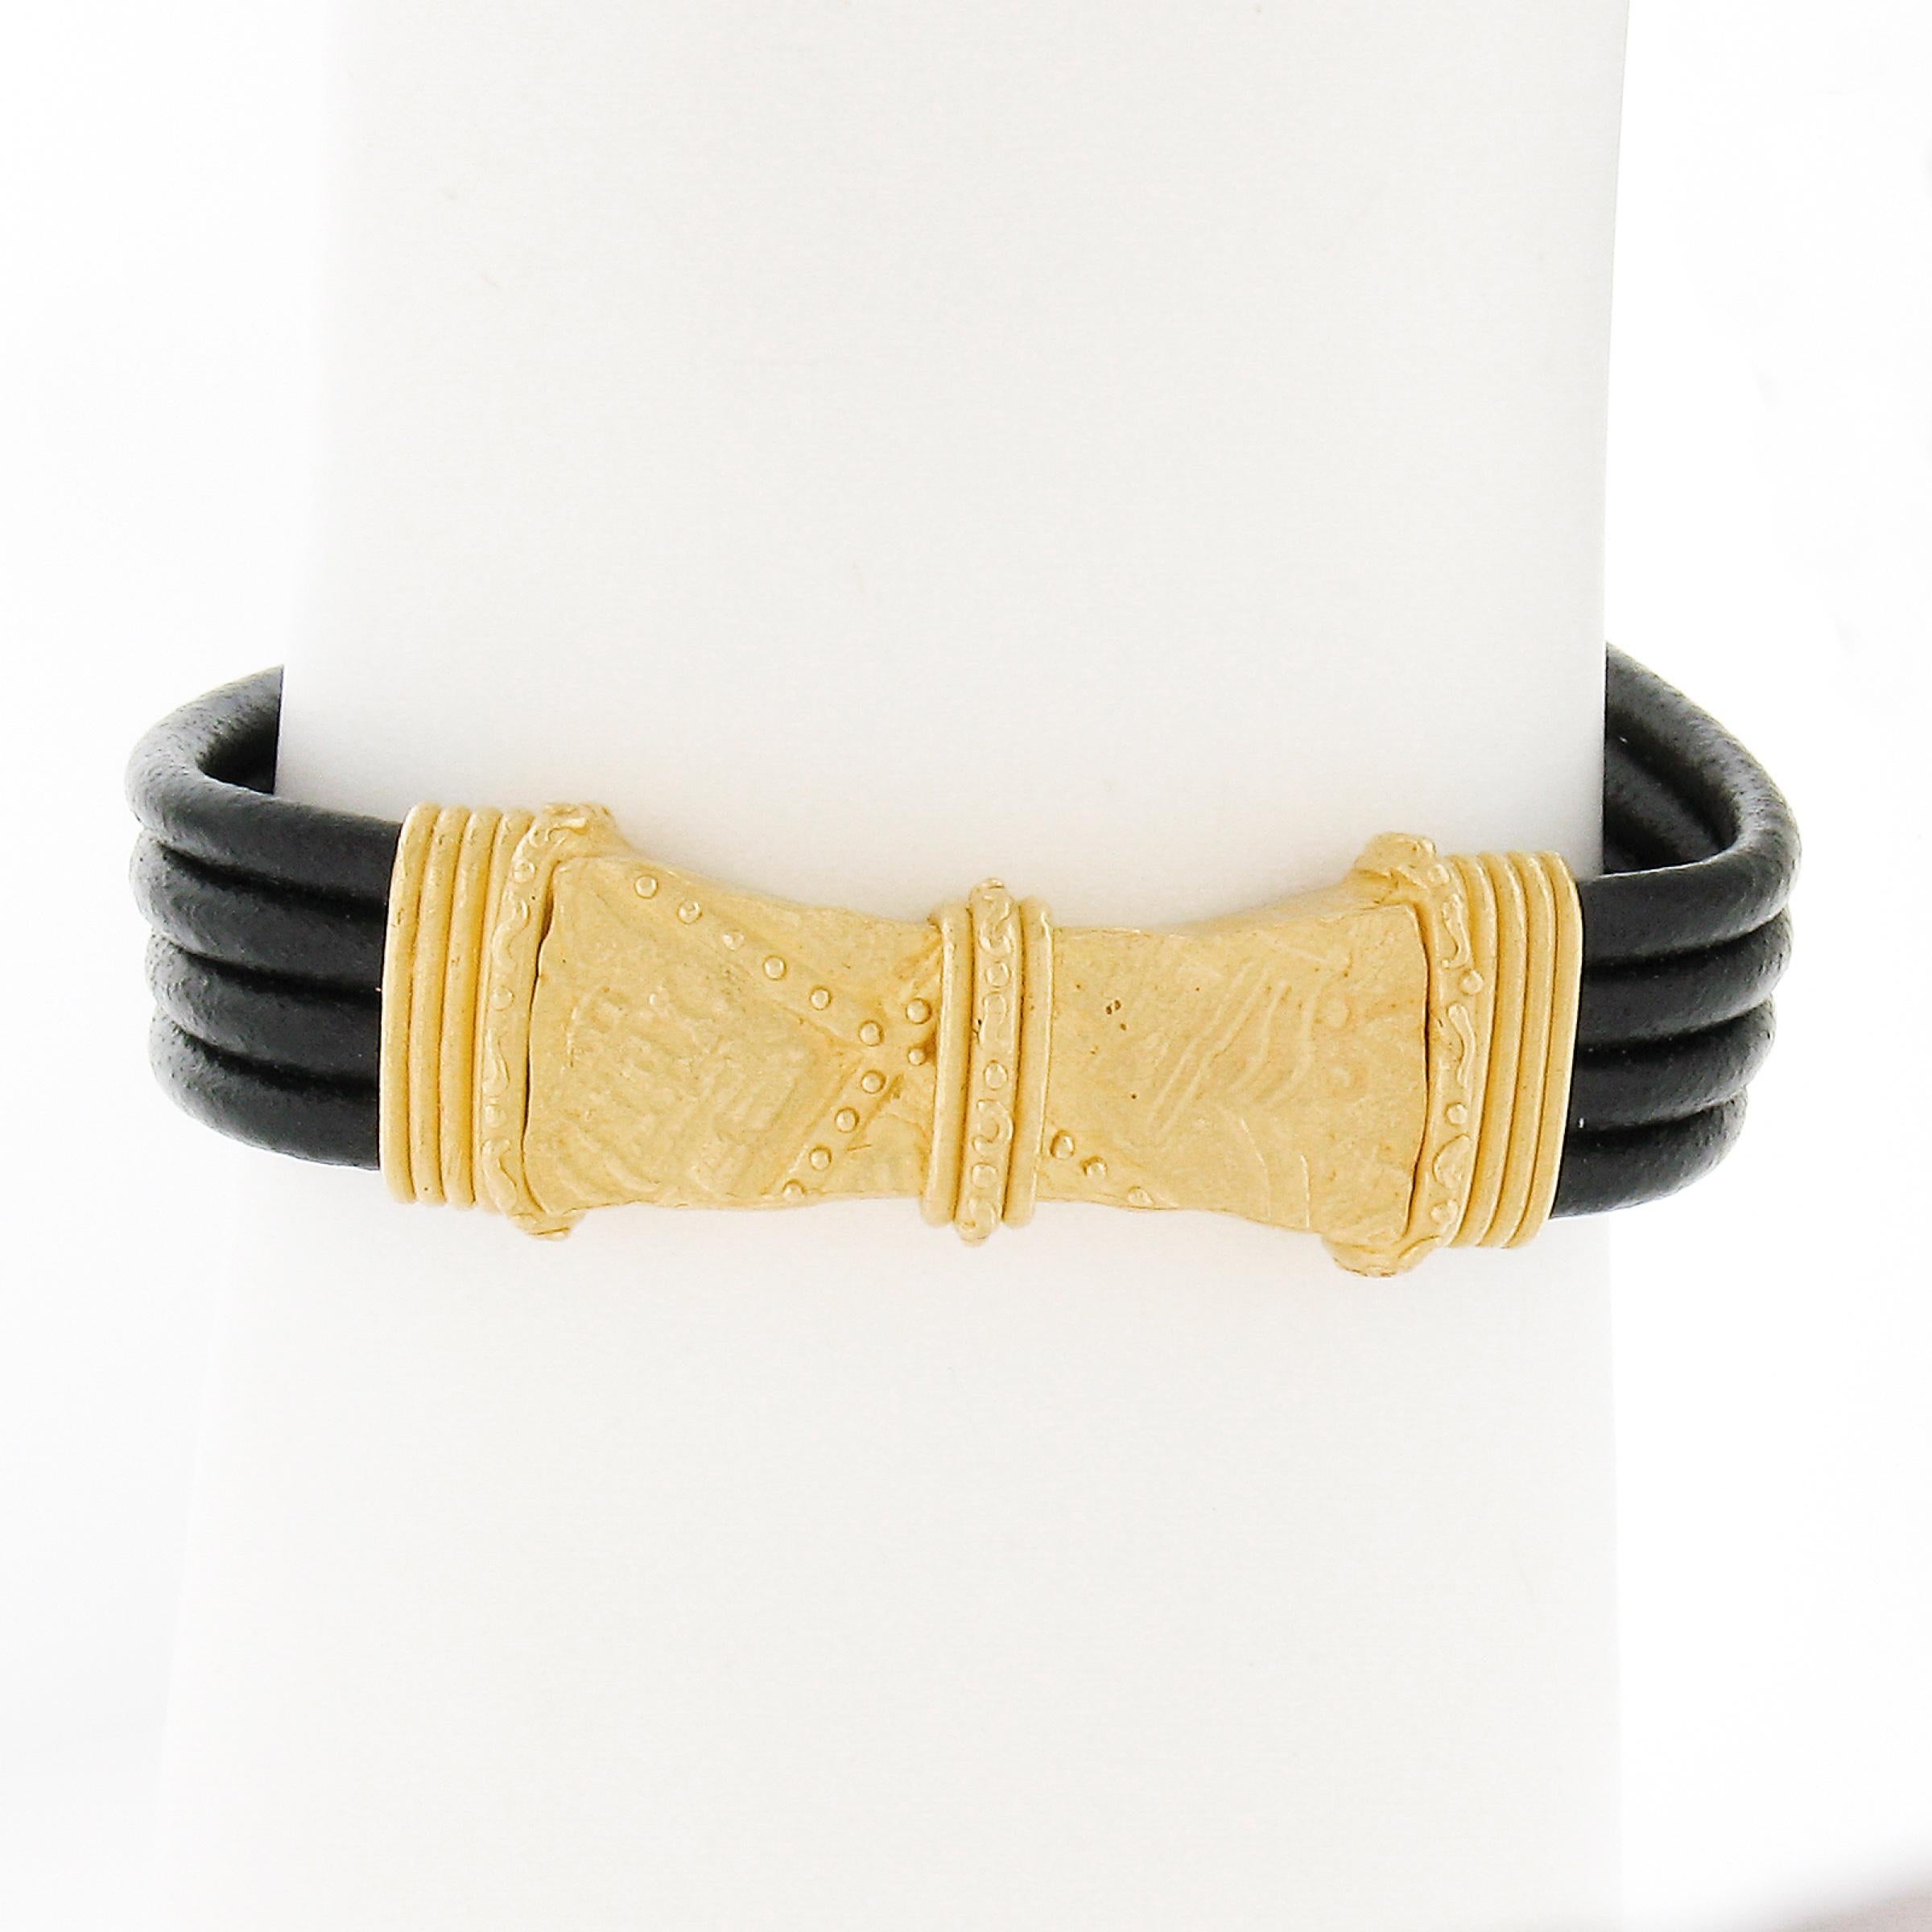 Material: Solid 22k Yellow Gold w/ Black Leather Cord
Weight: 41.43 Grams
Chain Type: 4 Row Black Leather Cord - 3mm
Size: Will Comfortably fit 6.5